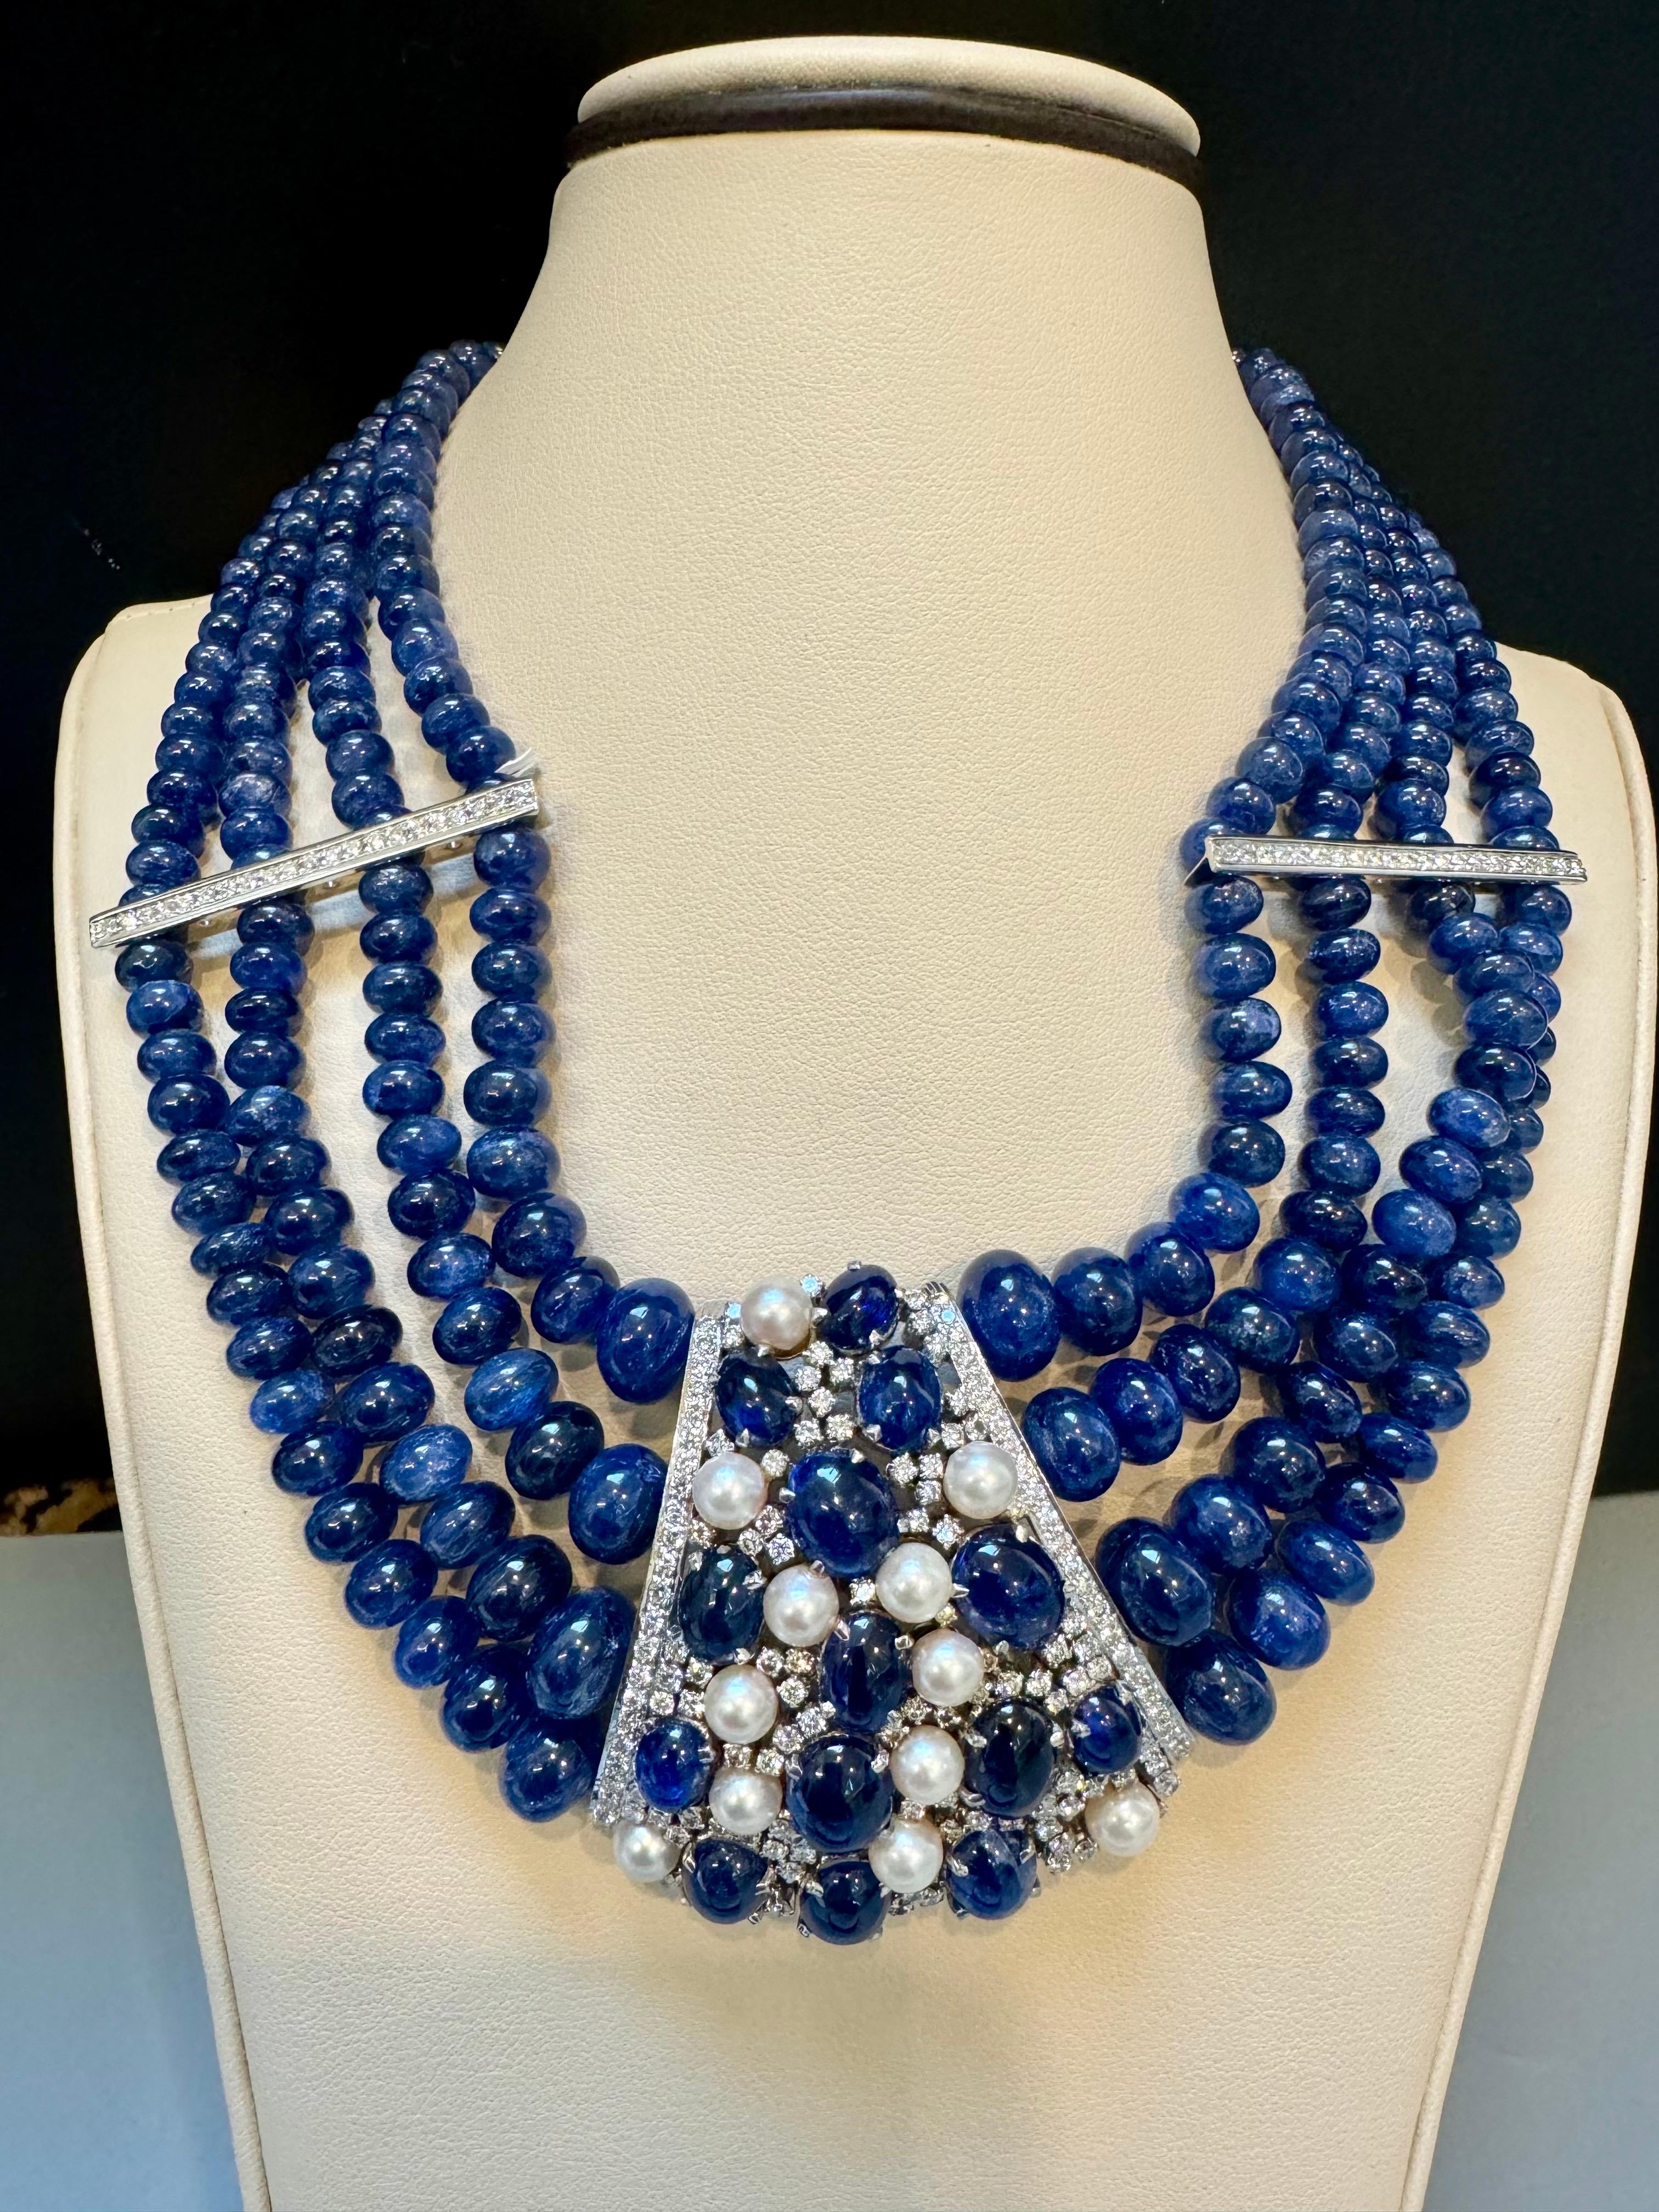 700Ct Sapphire Bead Necklace with cabochon & Diamond Center & Diamond Spacer 18K For Sale 2